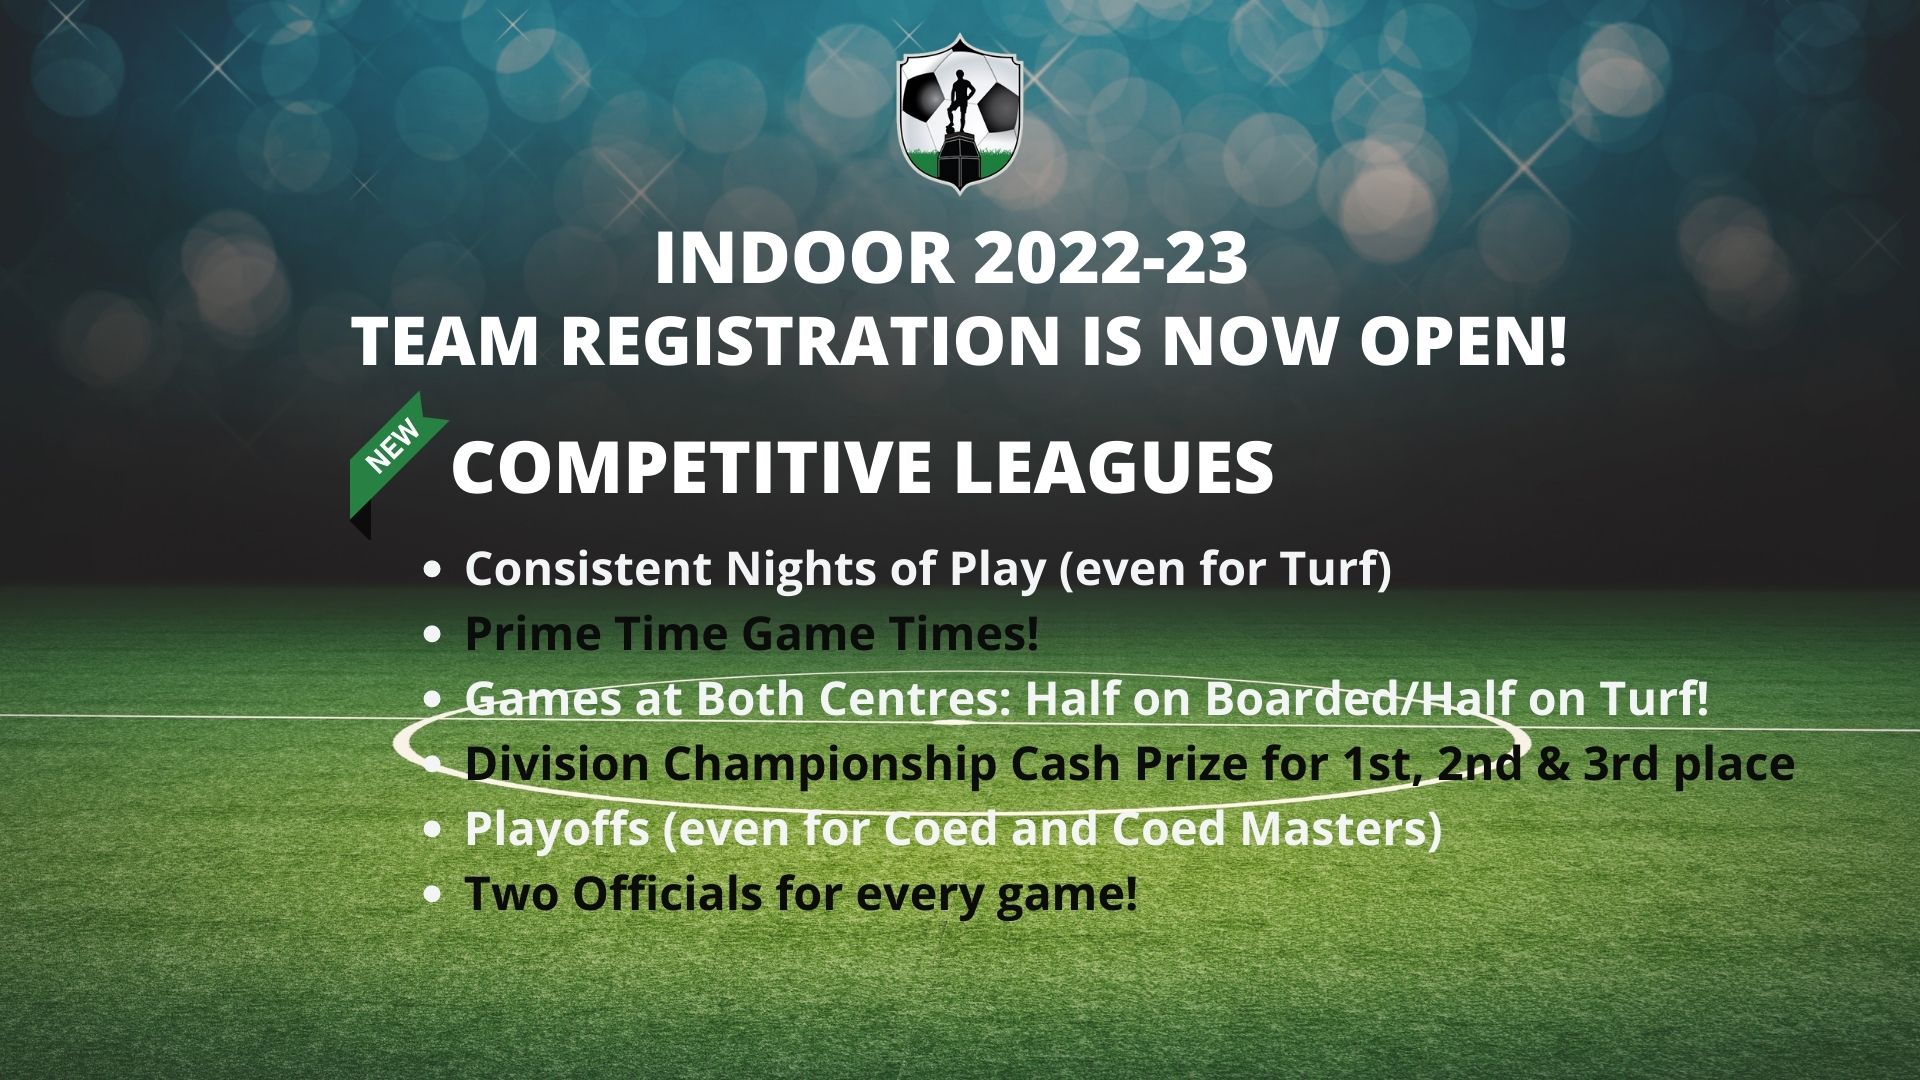 Indoor 2022-2023 Competitive Leagues